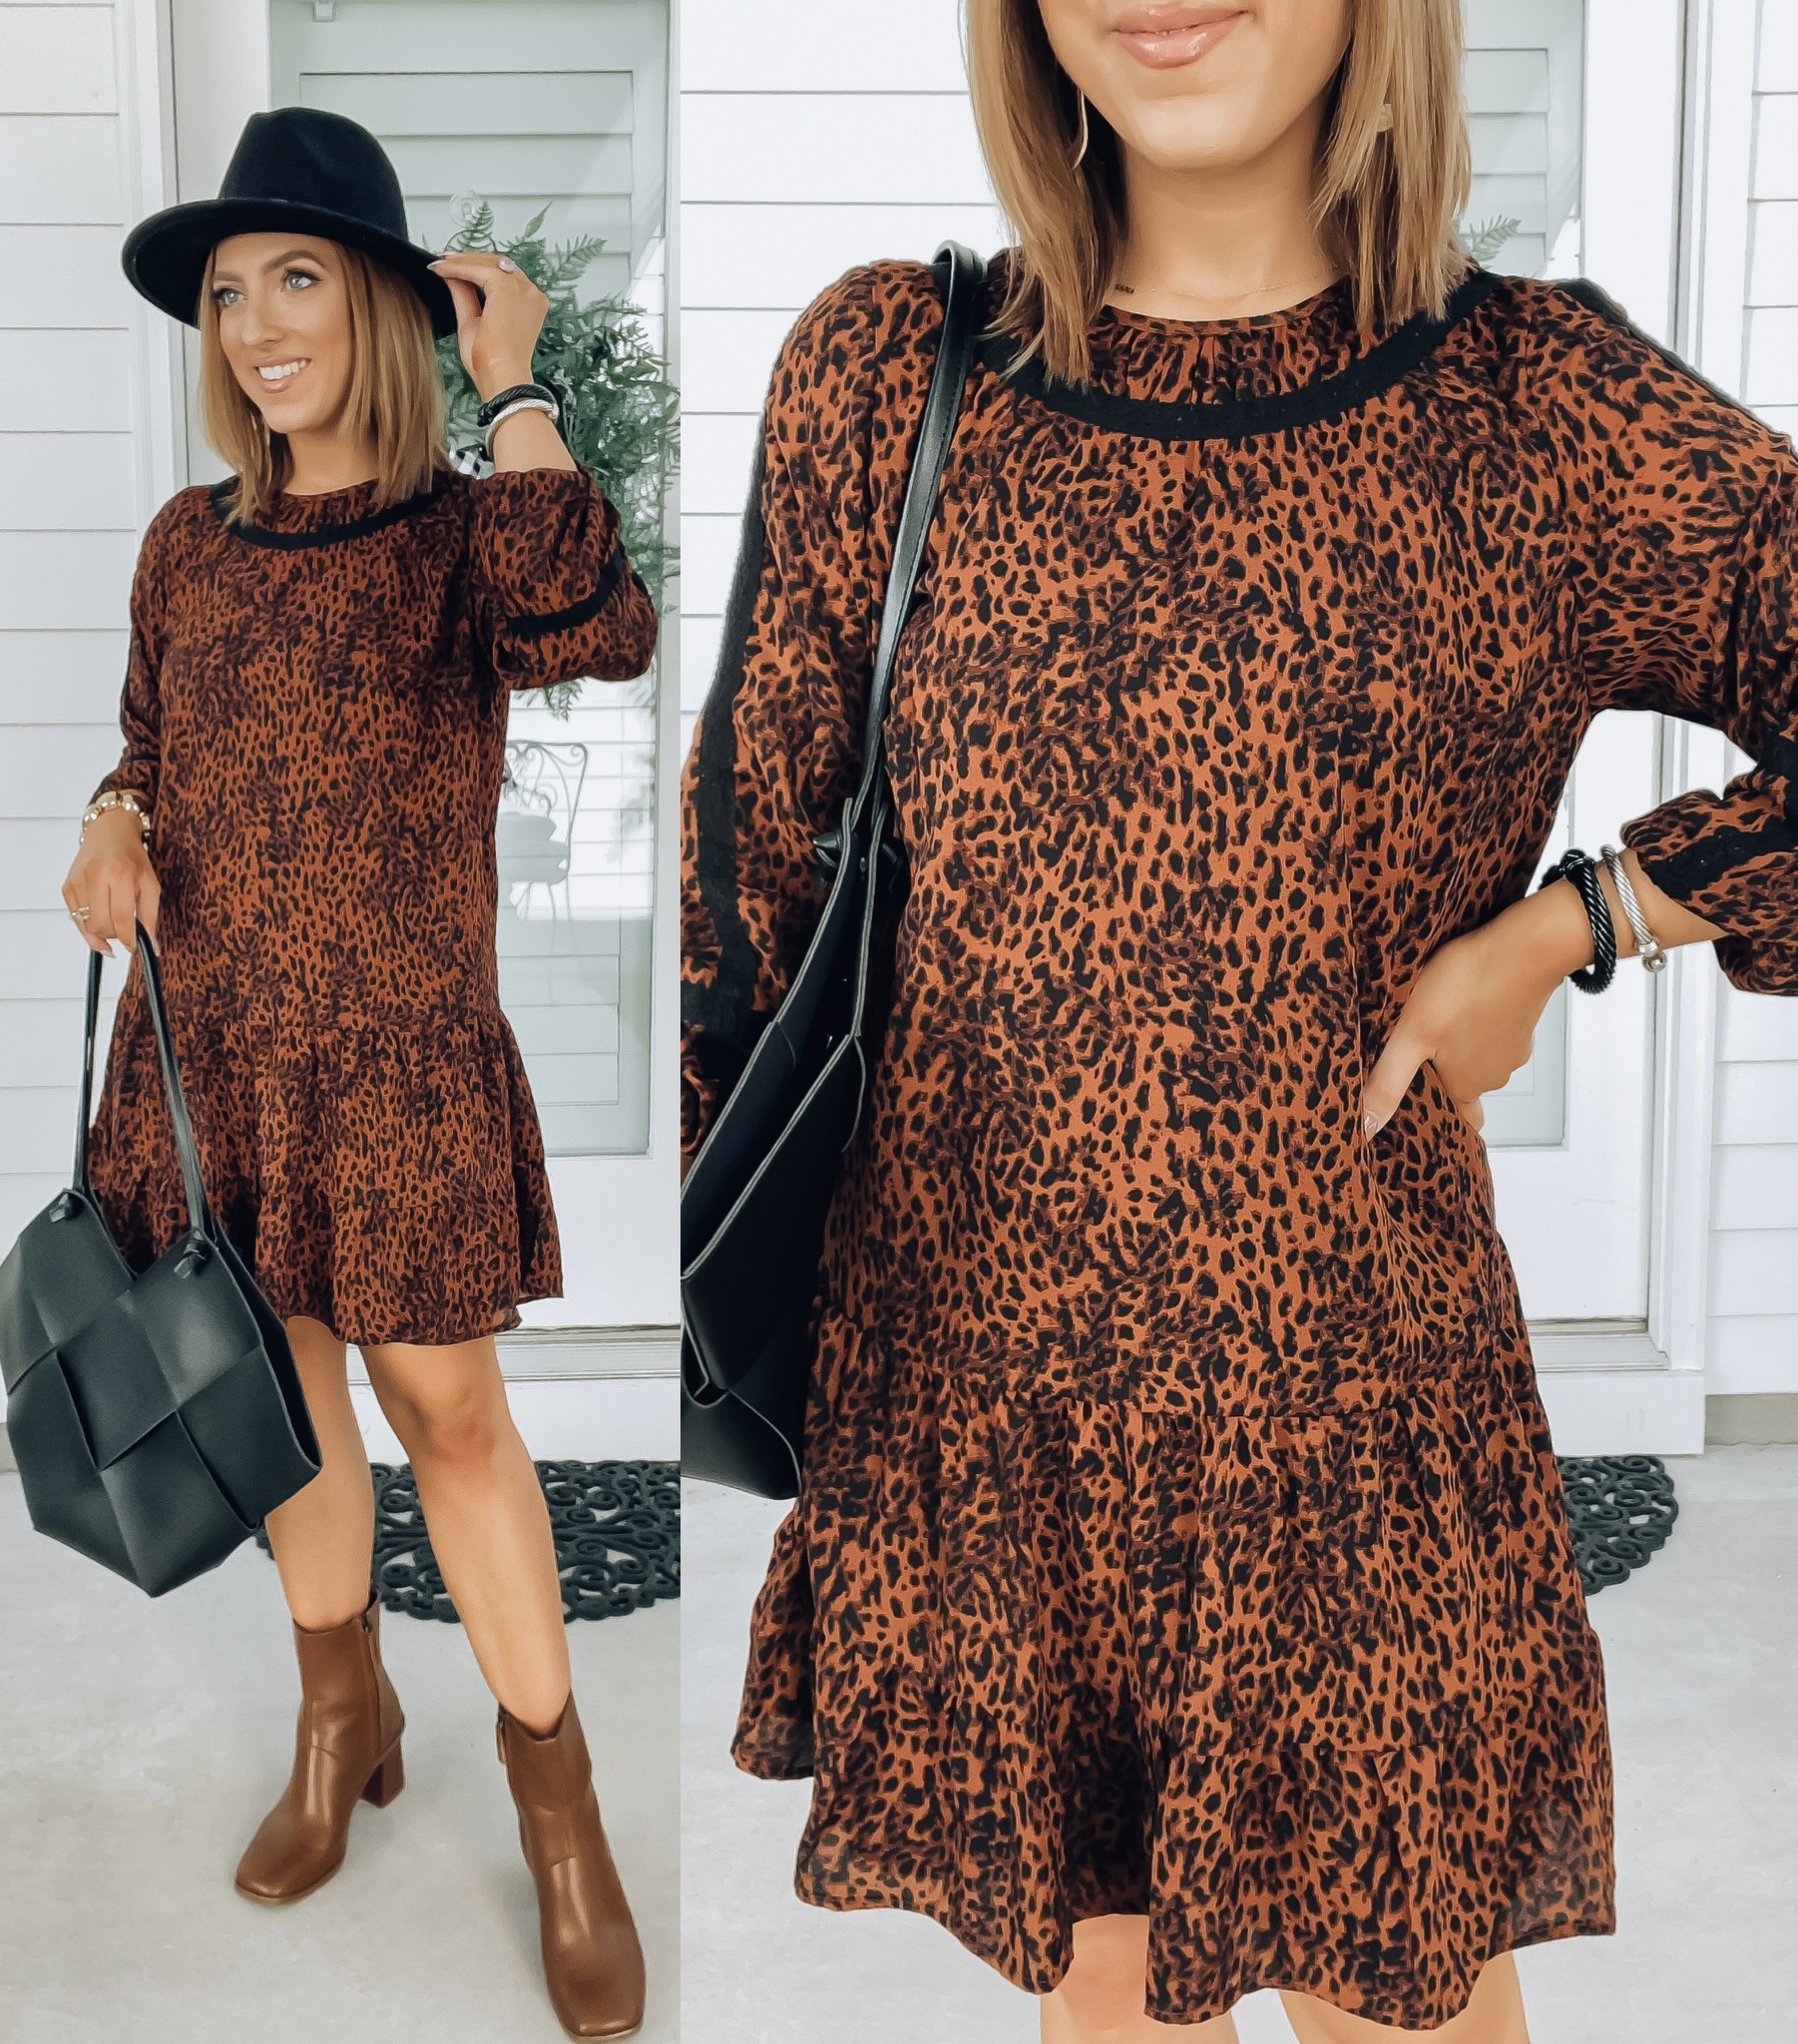 Walmart Fall Fashion Finds - Something Delightful Blog #WalmartFashion #WalmartStyle #WalmartHaul #WalmartFall2022 #Fall2022Trends